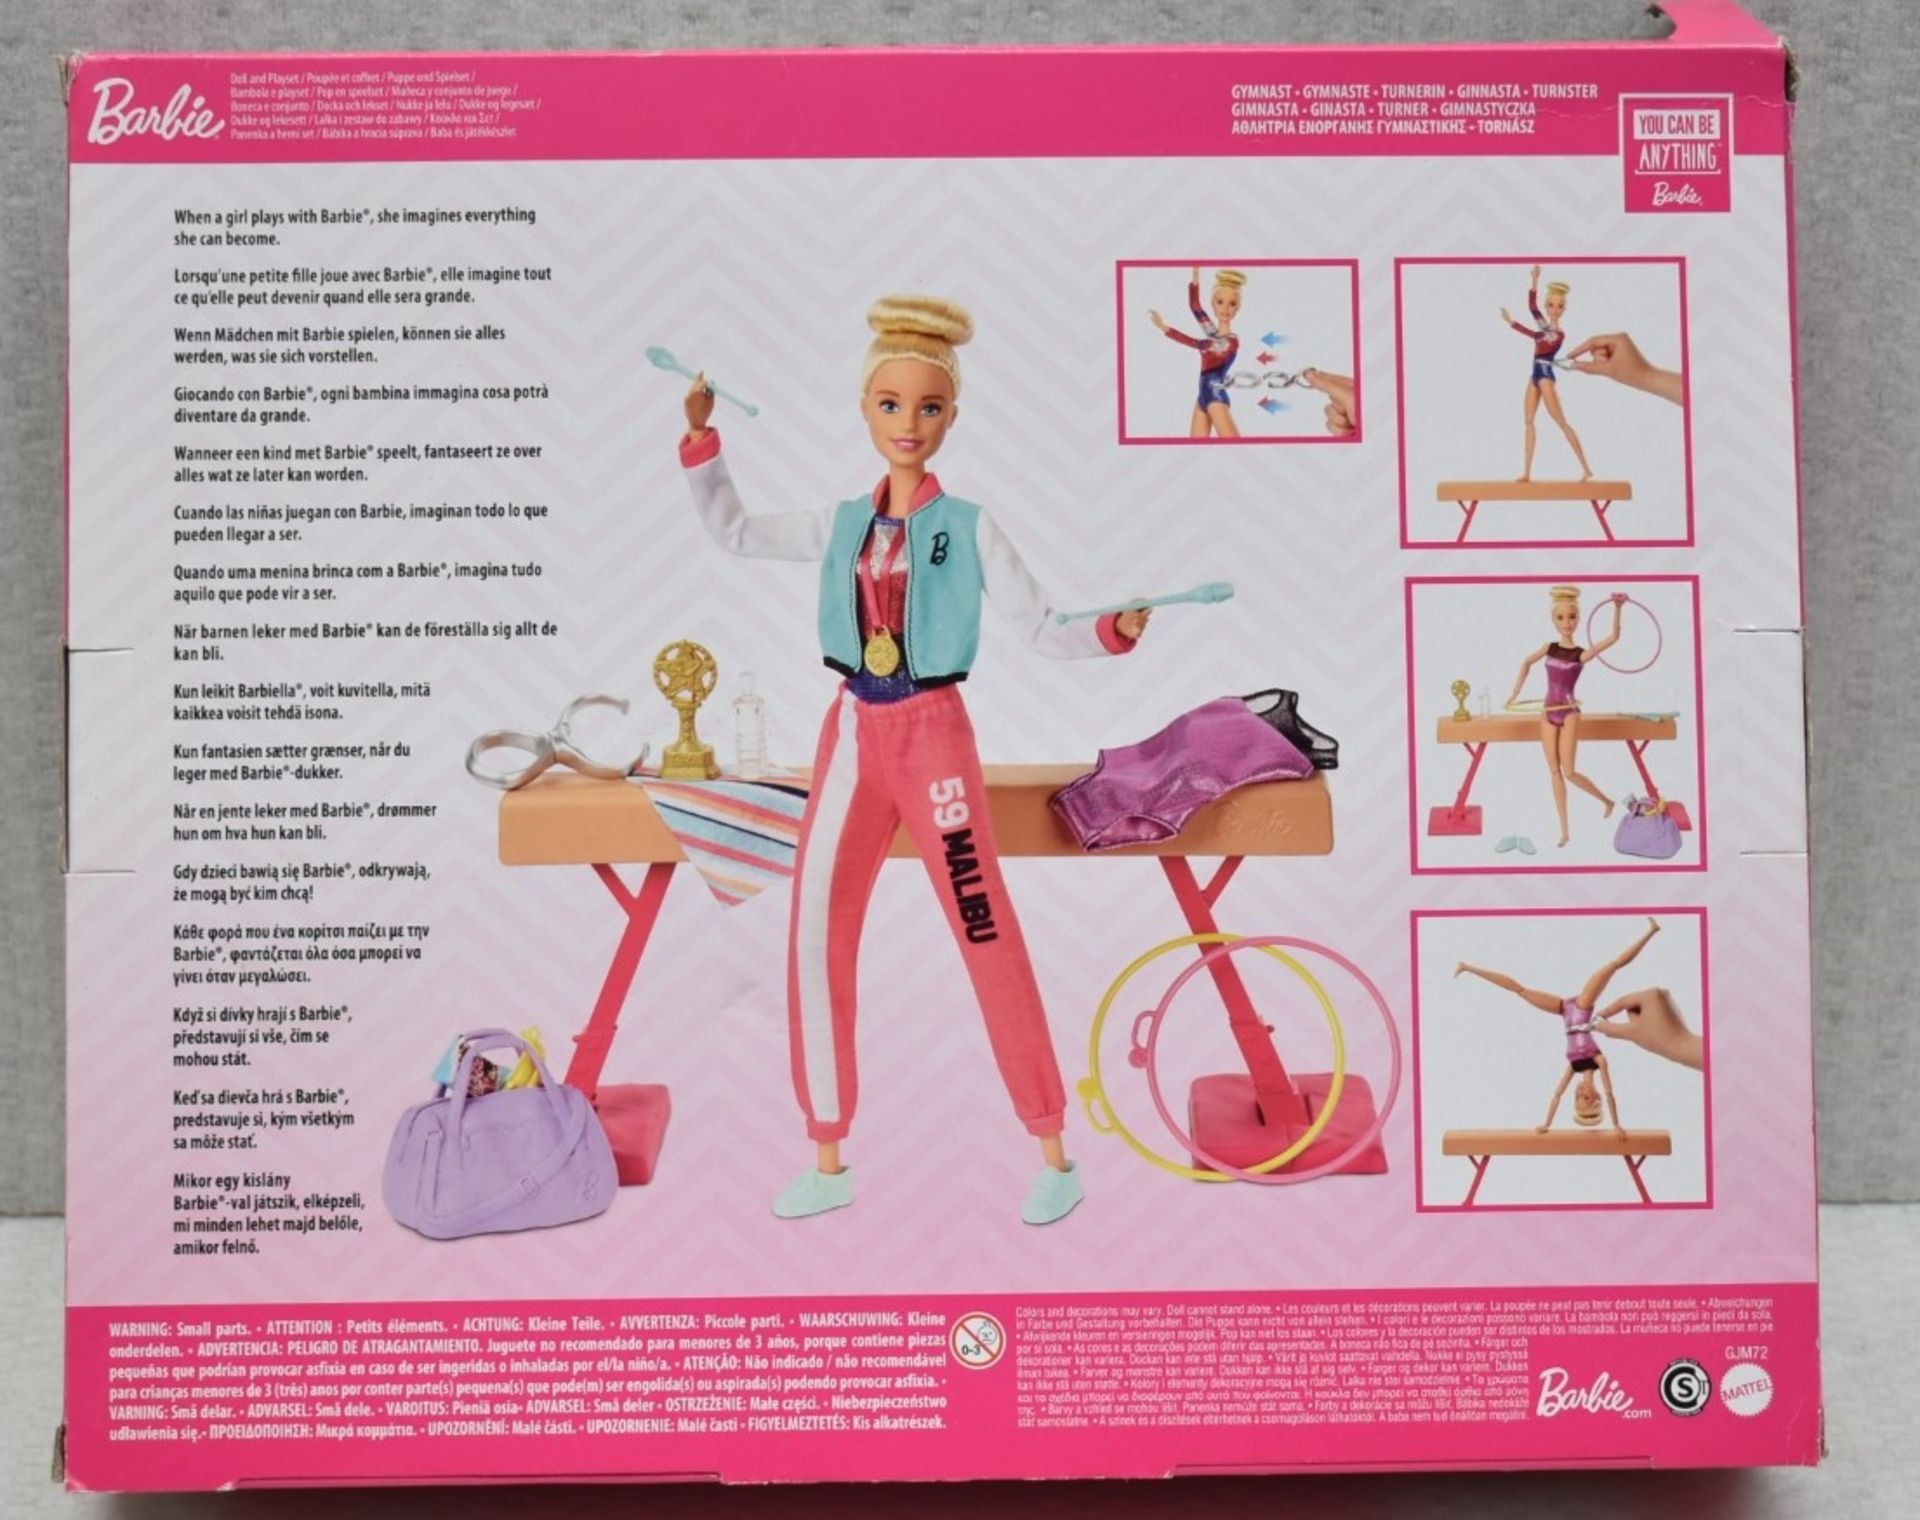 1 x BARBIE Sport Gymnastics Doll and Playset - Unused Boxed Stock - Ref: HAS2311/WH2/C11/02-23-1 - - Image 2 of 3